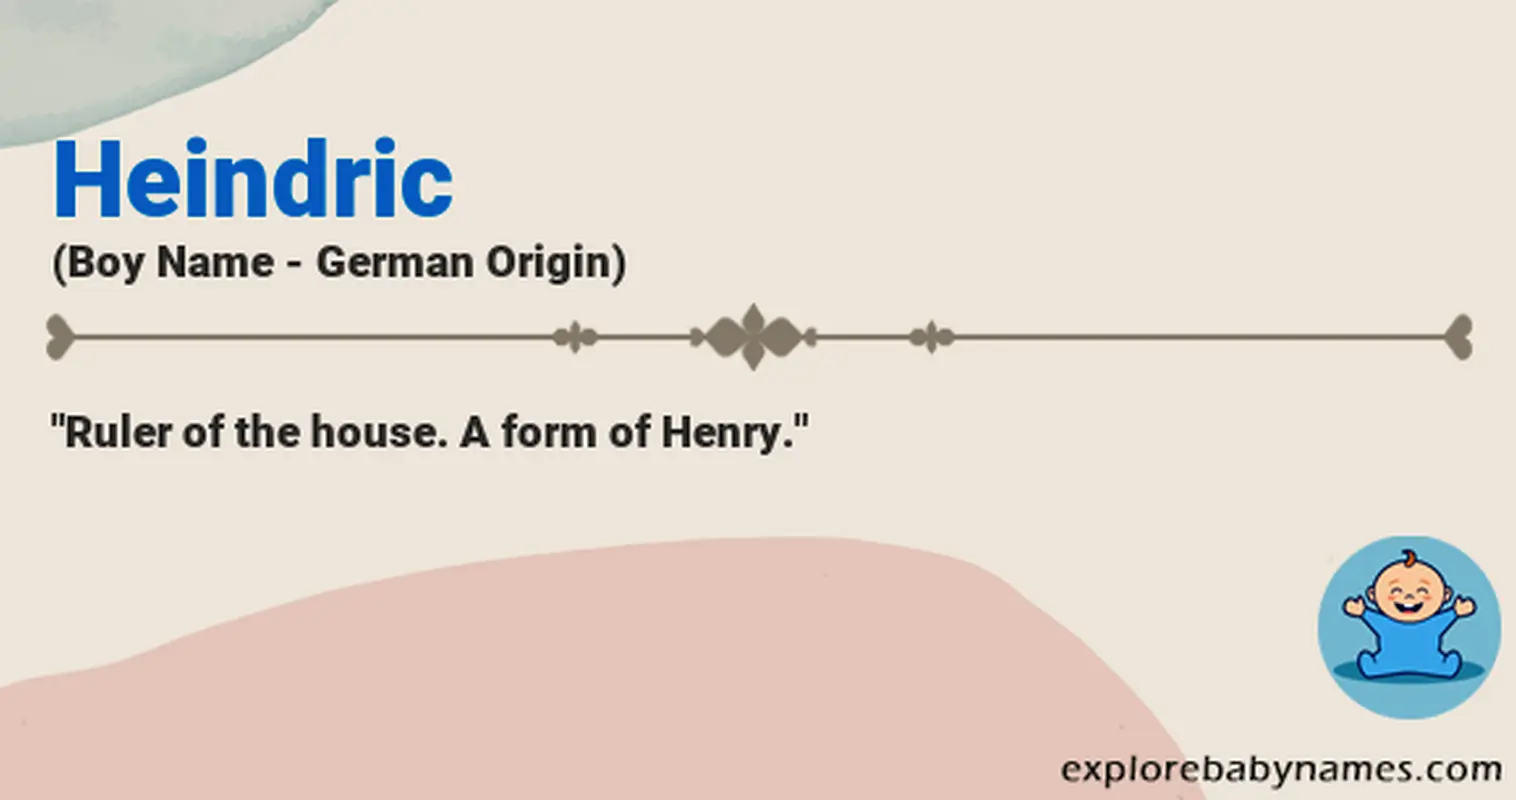 Meaning of Heindric